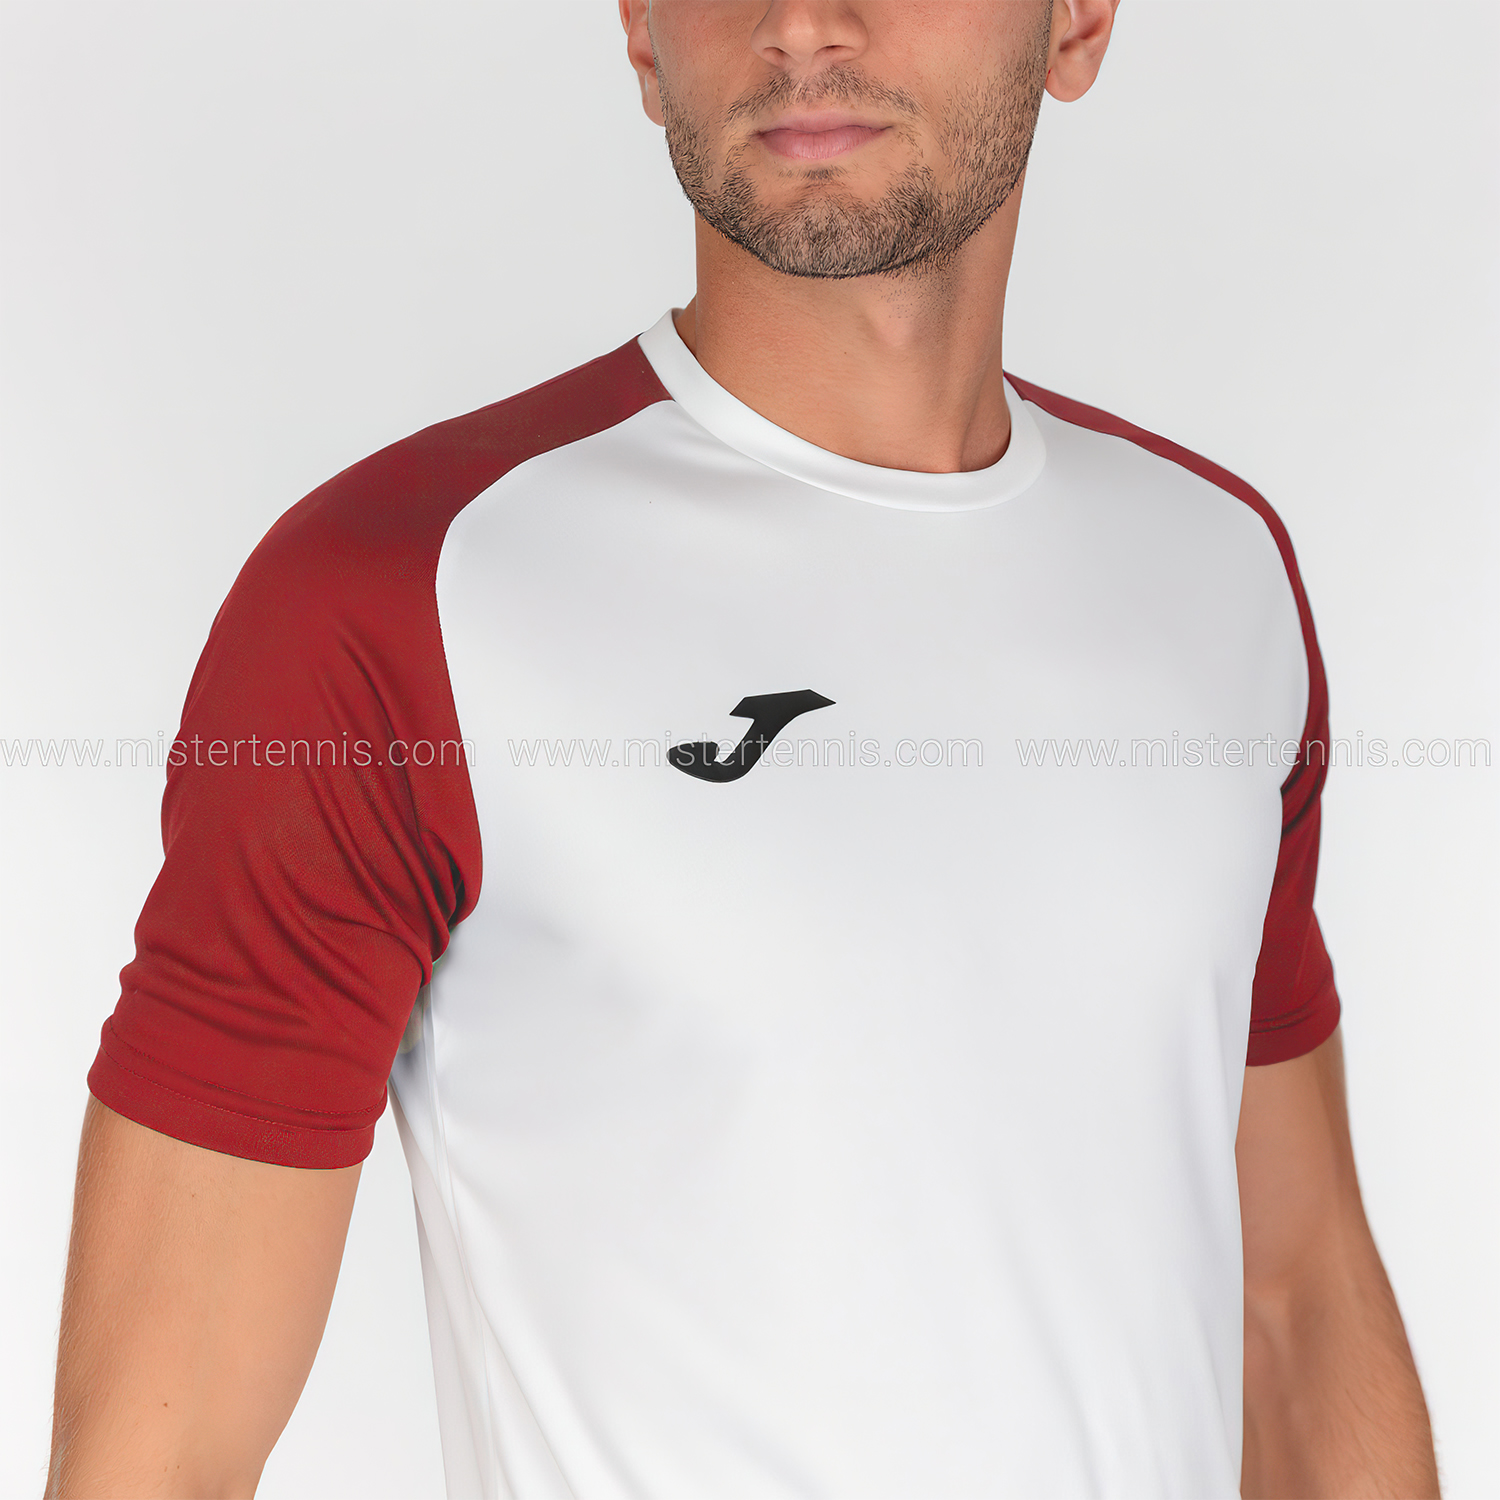 Joma Academy IV T-Shirt - White/Red